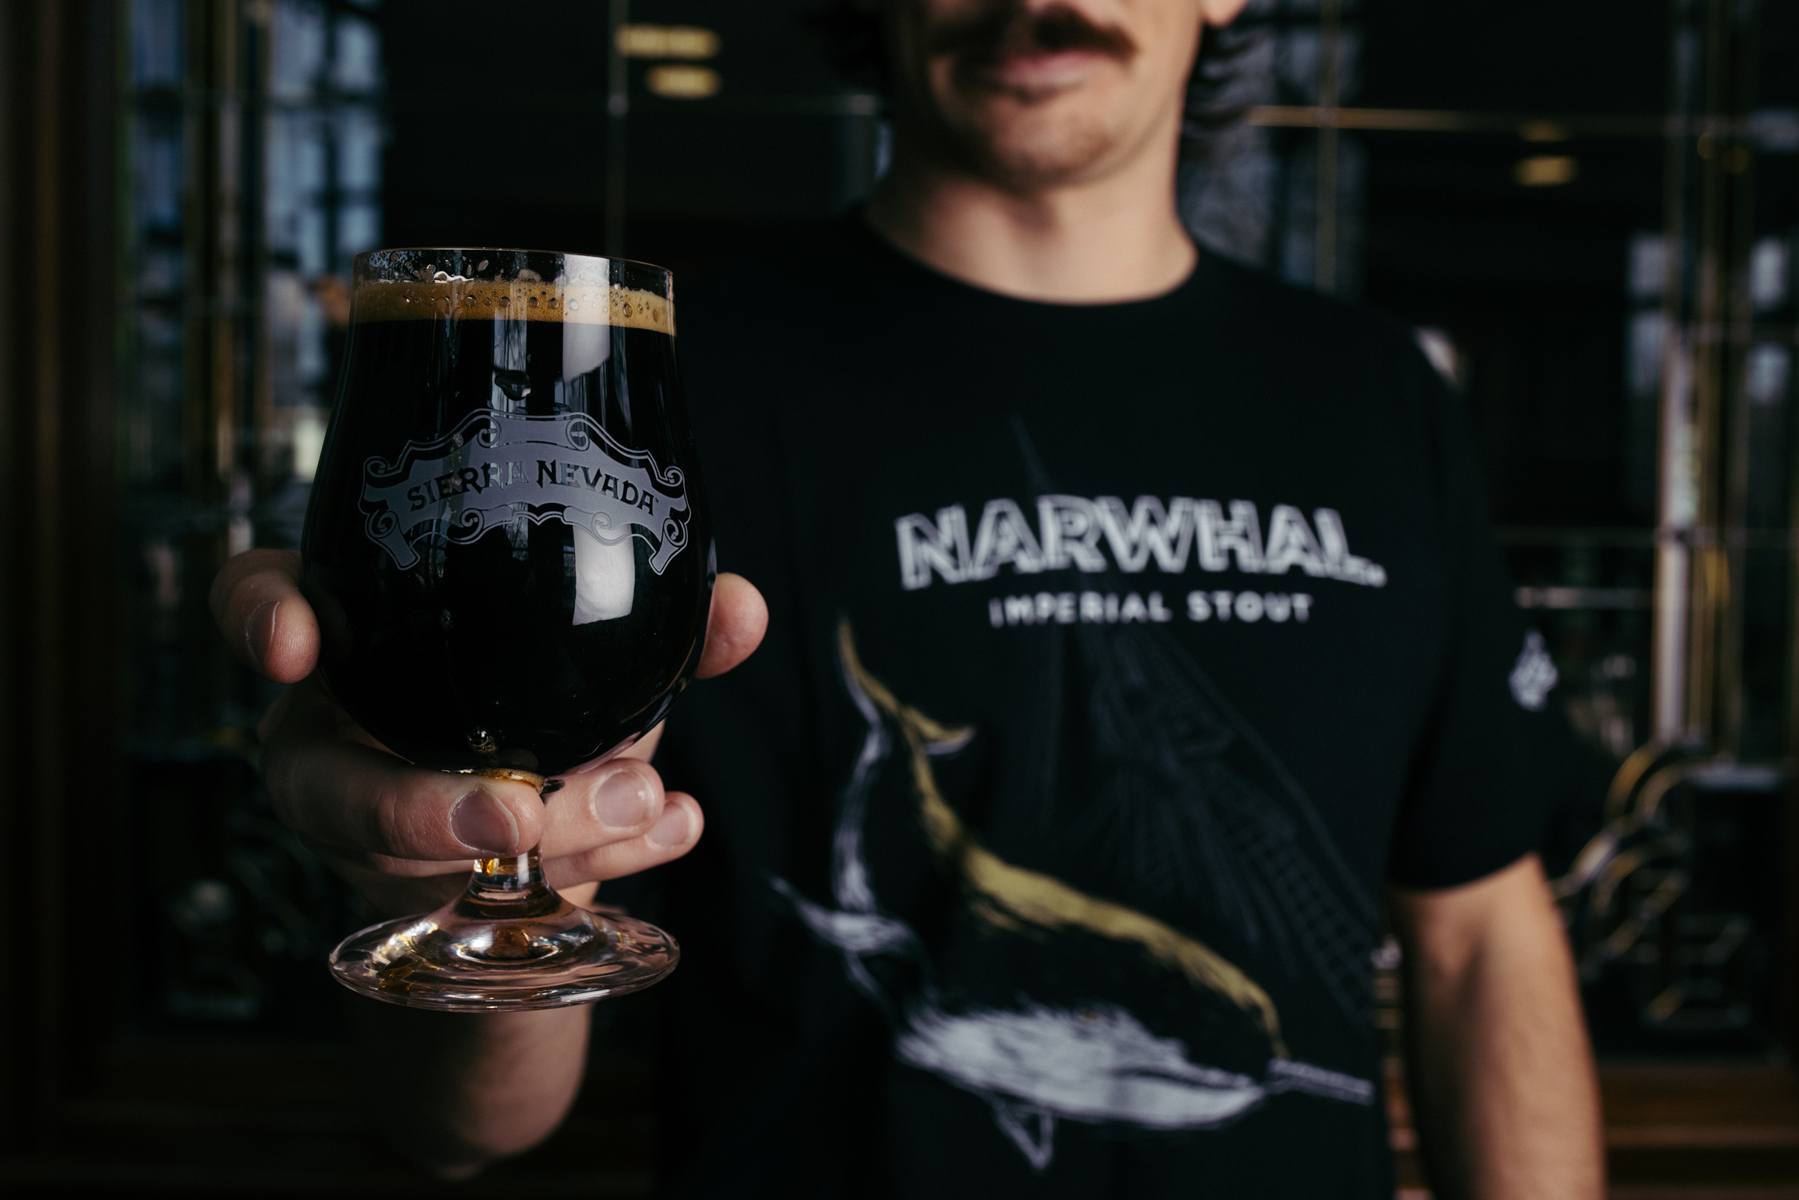 A young man holds out a glass of Sierra Nevada Narwhal Imperial Stout